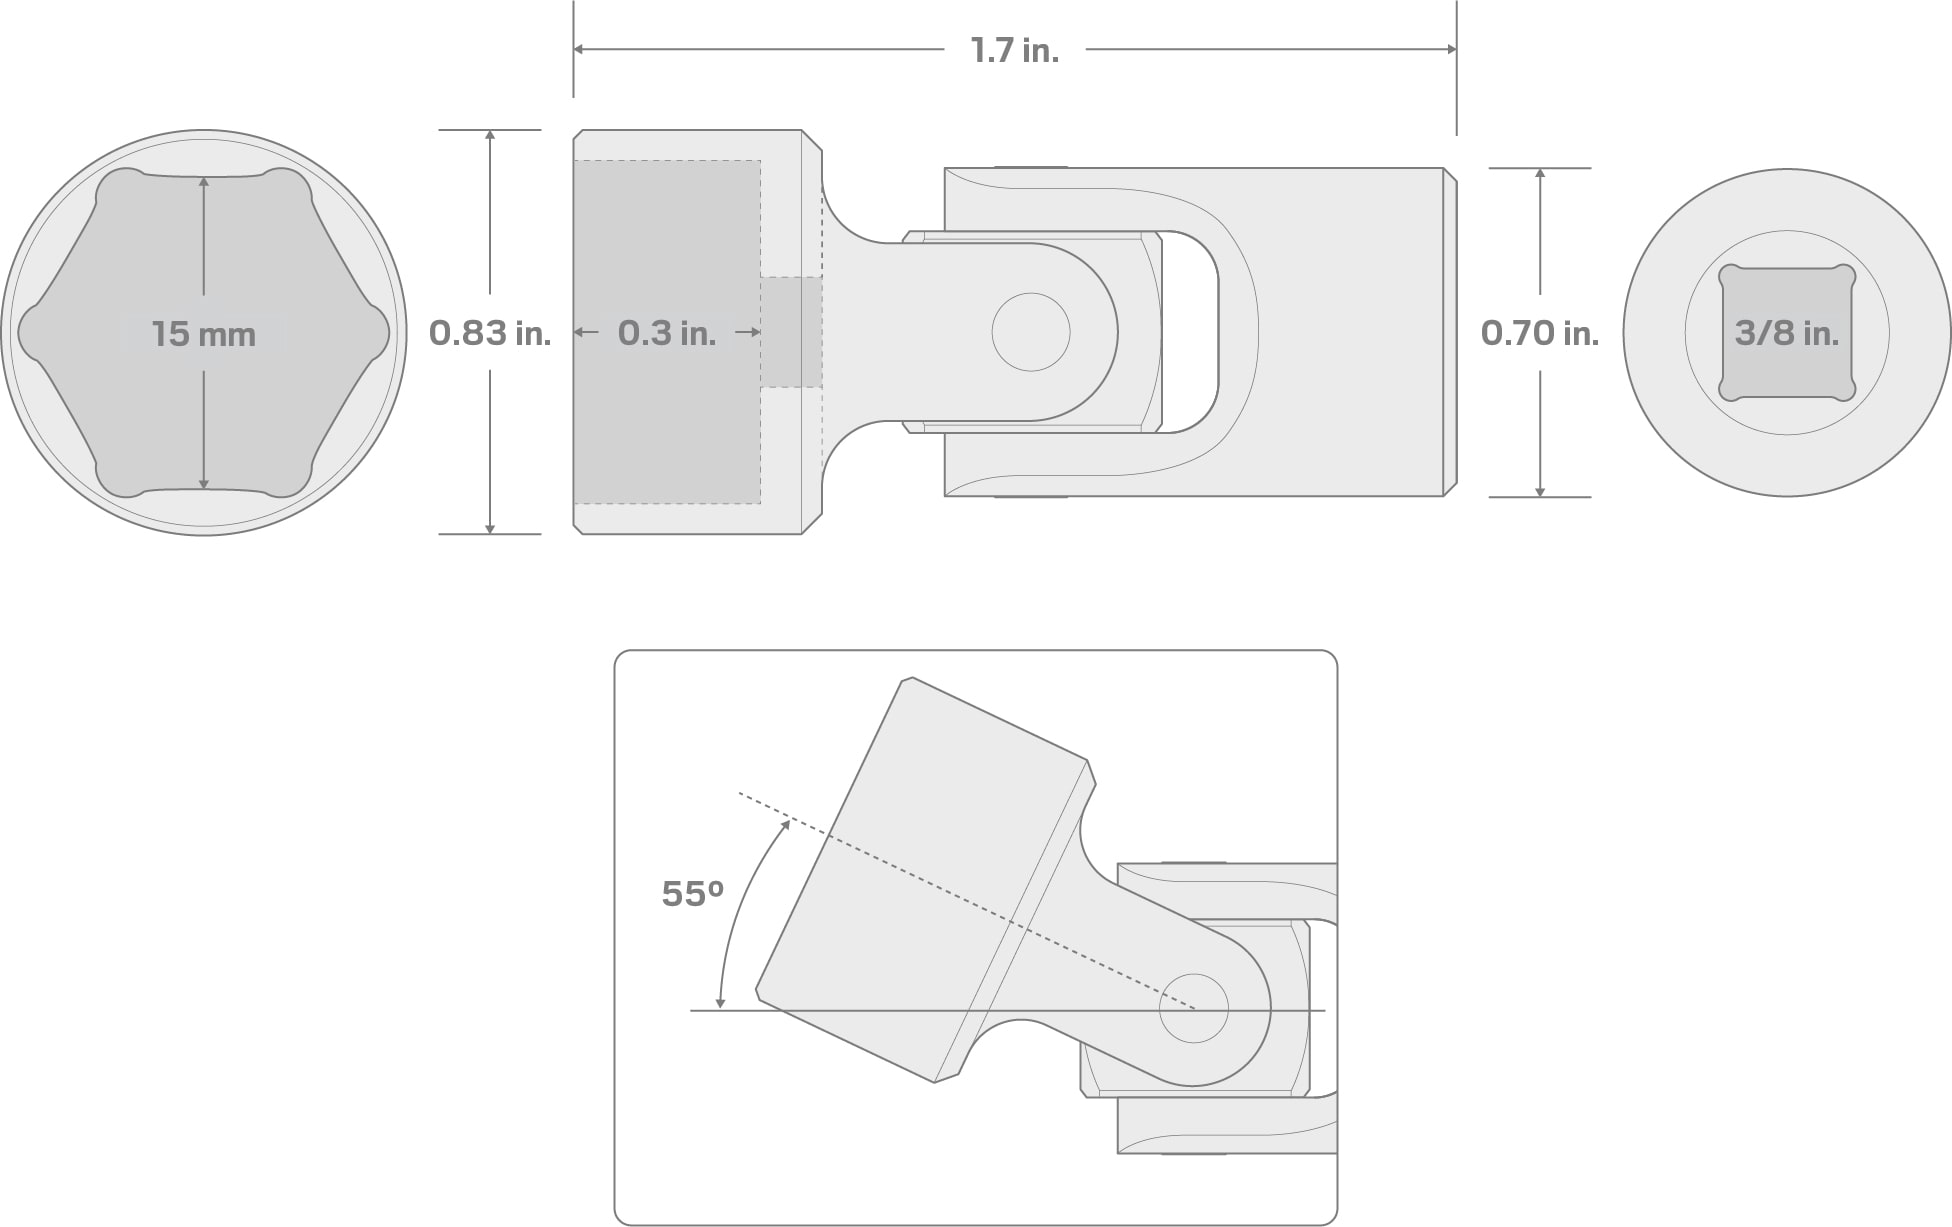 Specs for 3/8 Inch Drive x 15 mm Universal Joint Socket